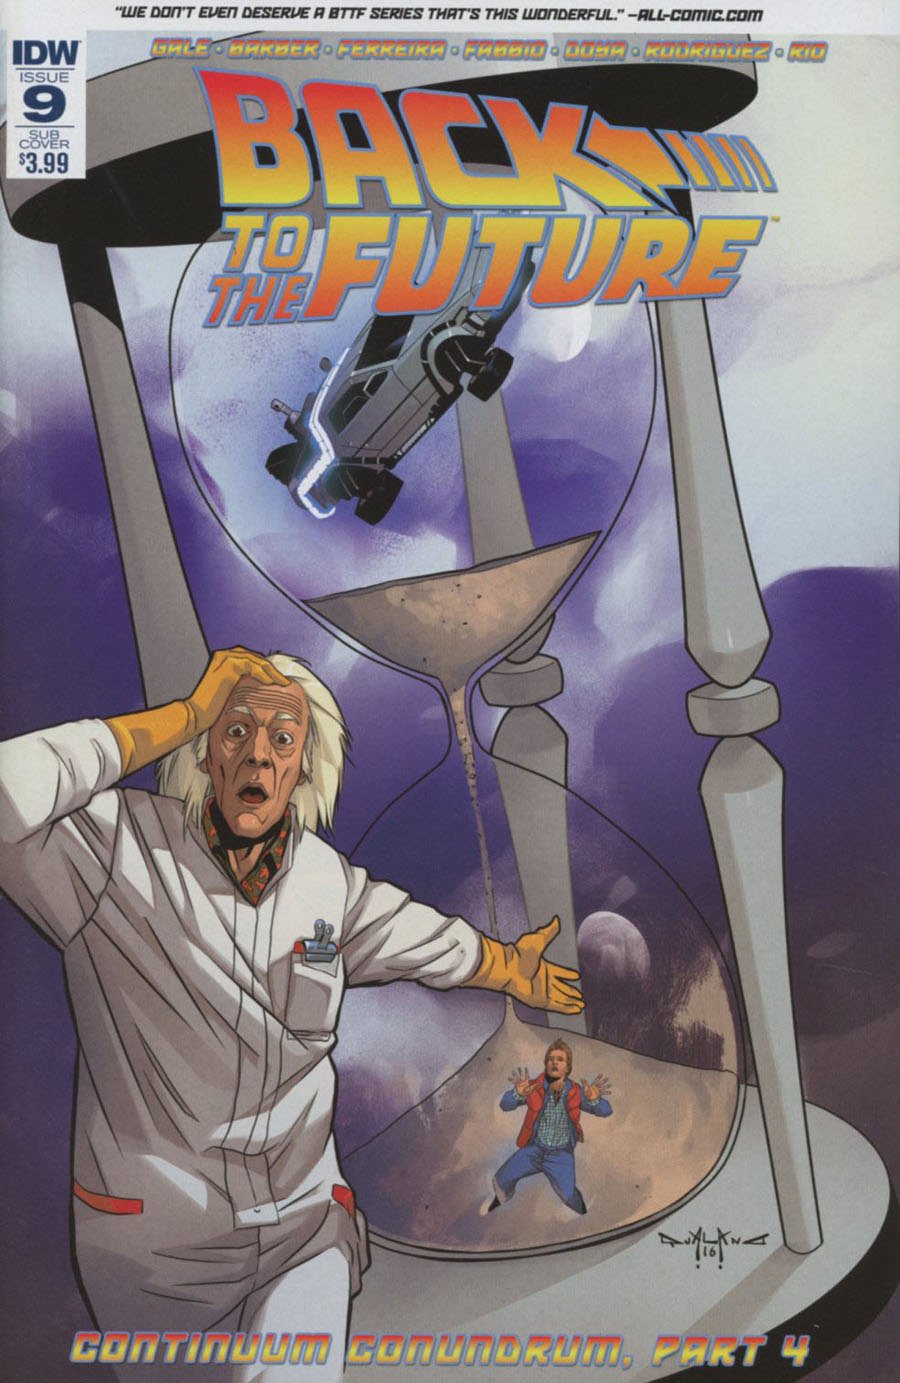 Back To The Future Vol 2 #9 Cover B Variant Pasquale Qualano Subscription Cover